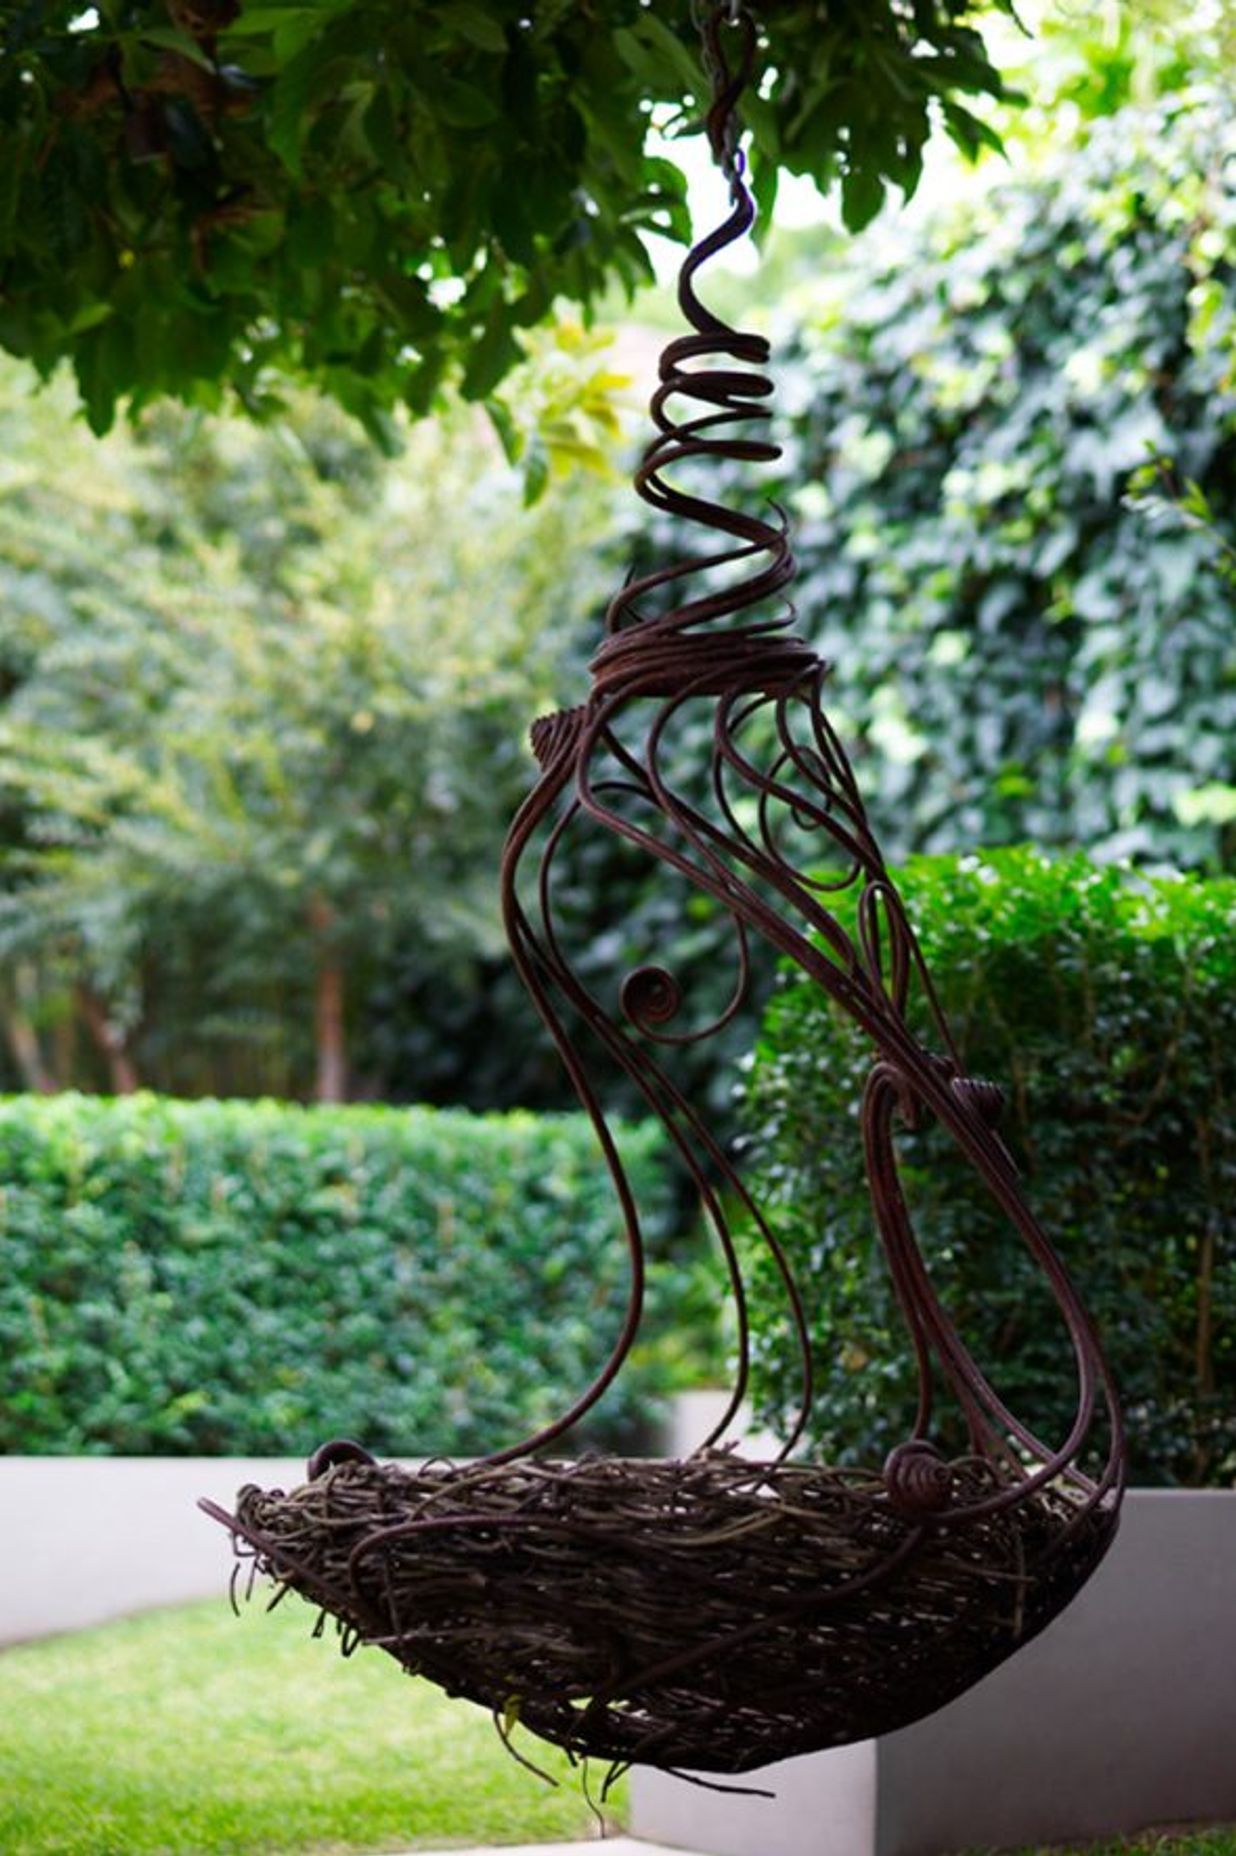 The shape of things to come: Introducing sculpture to the garden